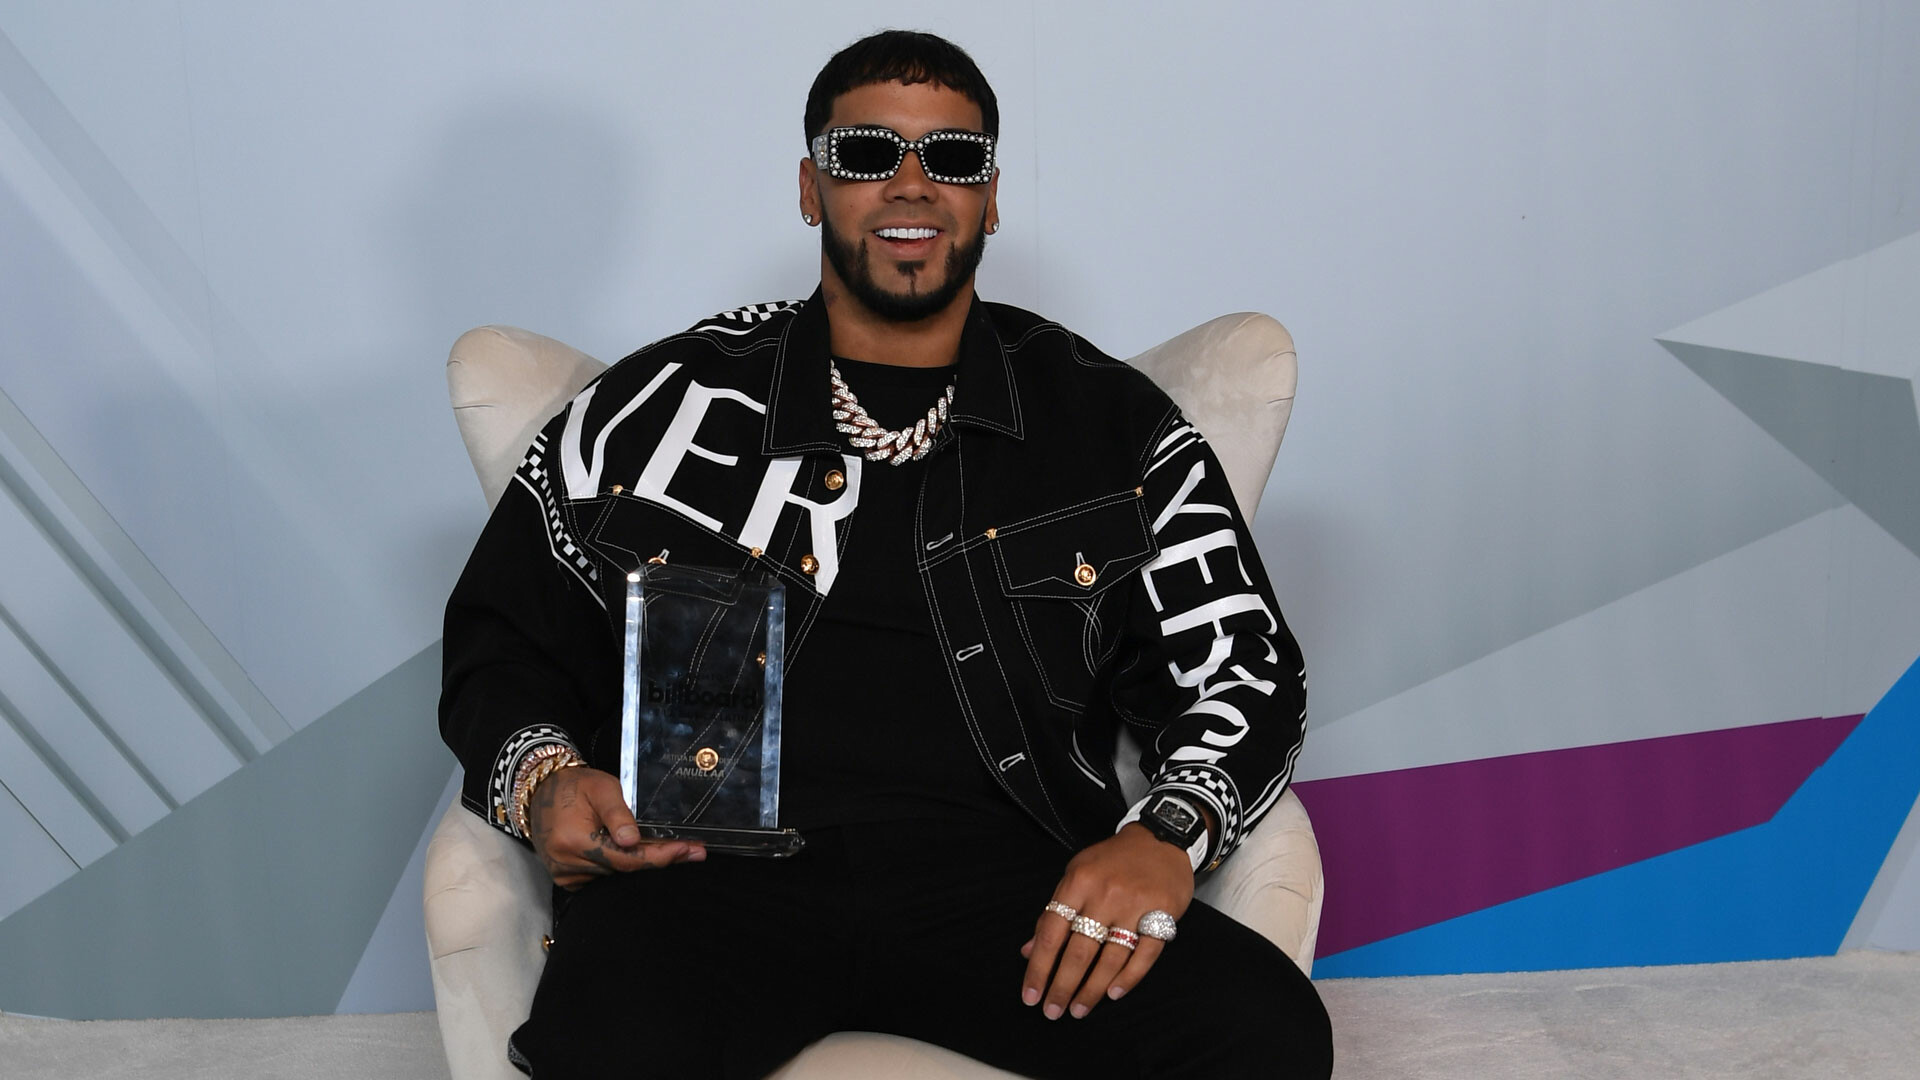 Anuel AA: One of the Boricua rappers who spearheaded the Latin trap movement. 1920x1080 Full HD Background.